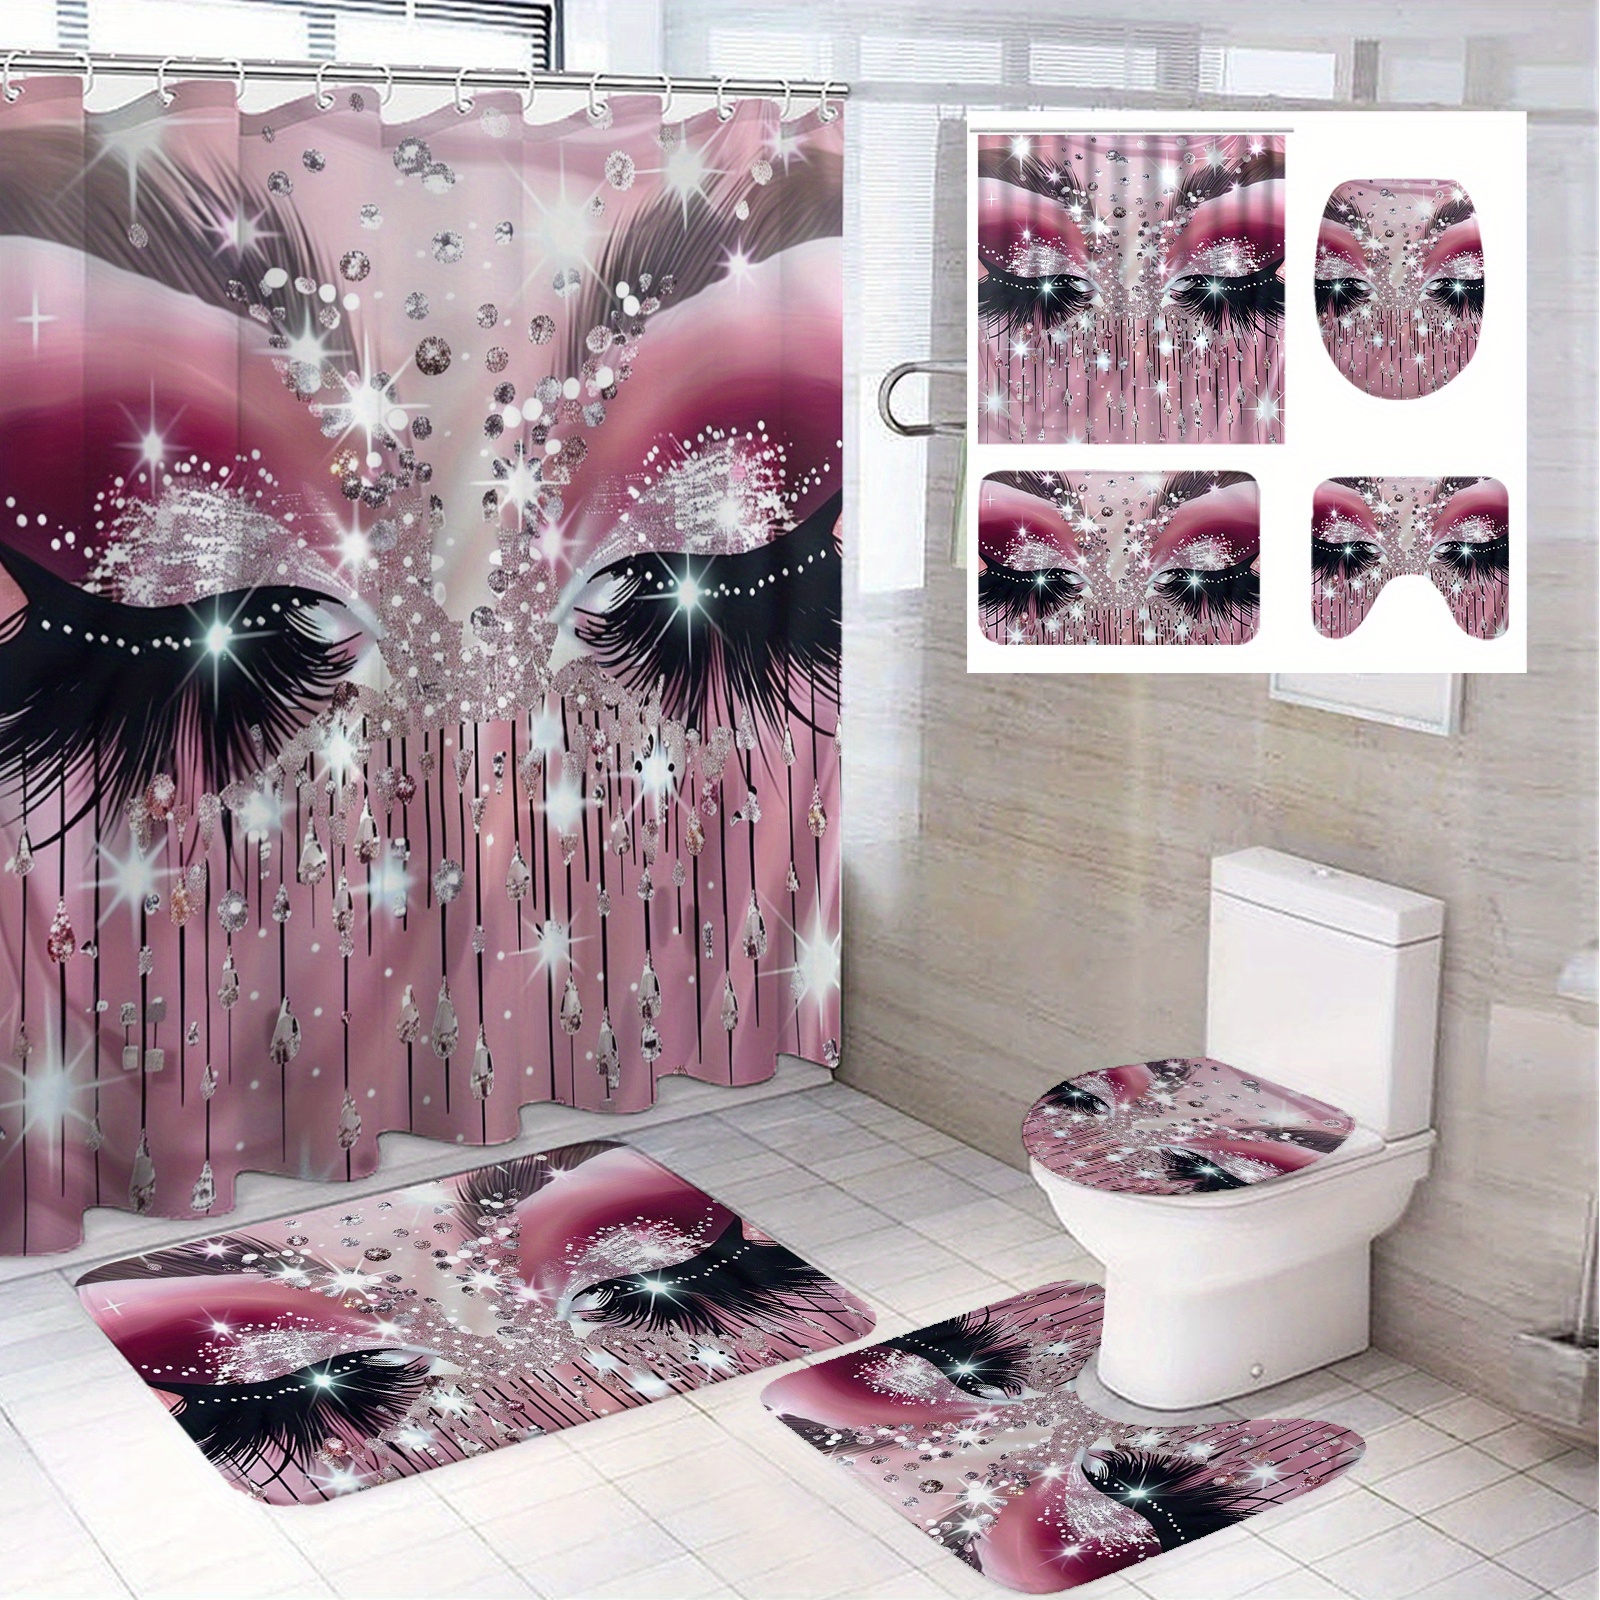 

1/4pcs Pink Crystal Decorative Eye Pattern Modern Bathroom Decoration, Polyester Bathroom Set With 12 Hooks, Bathroom Non-slip Floor Mat, Toilet Seat Cover And U-shaped Mat Home Decoration 71*71in